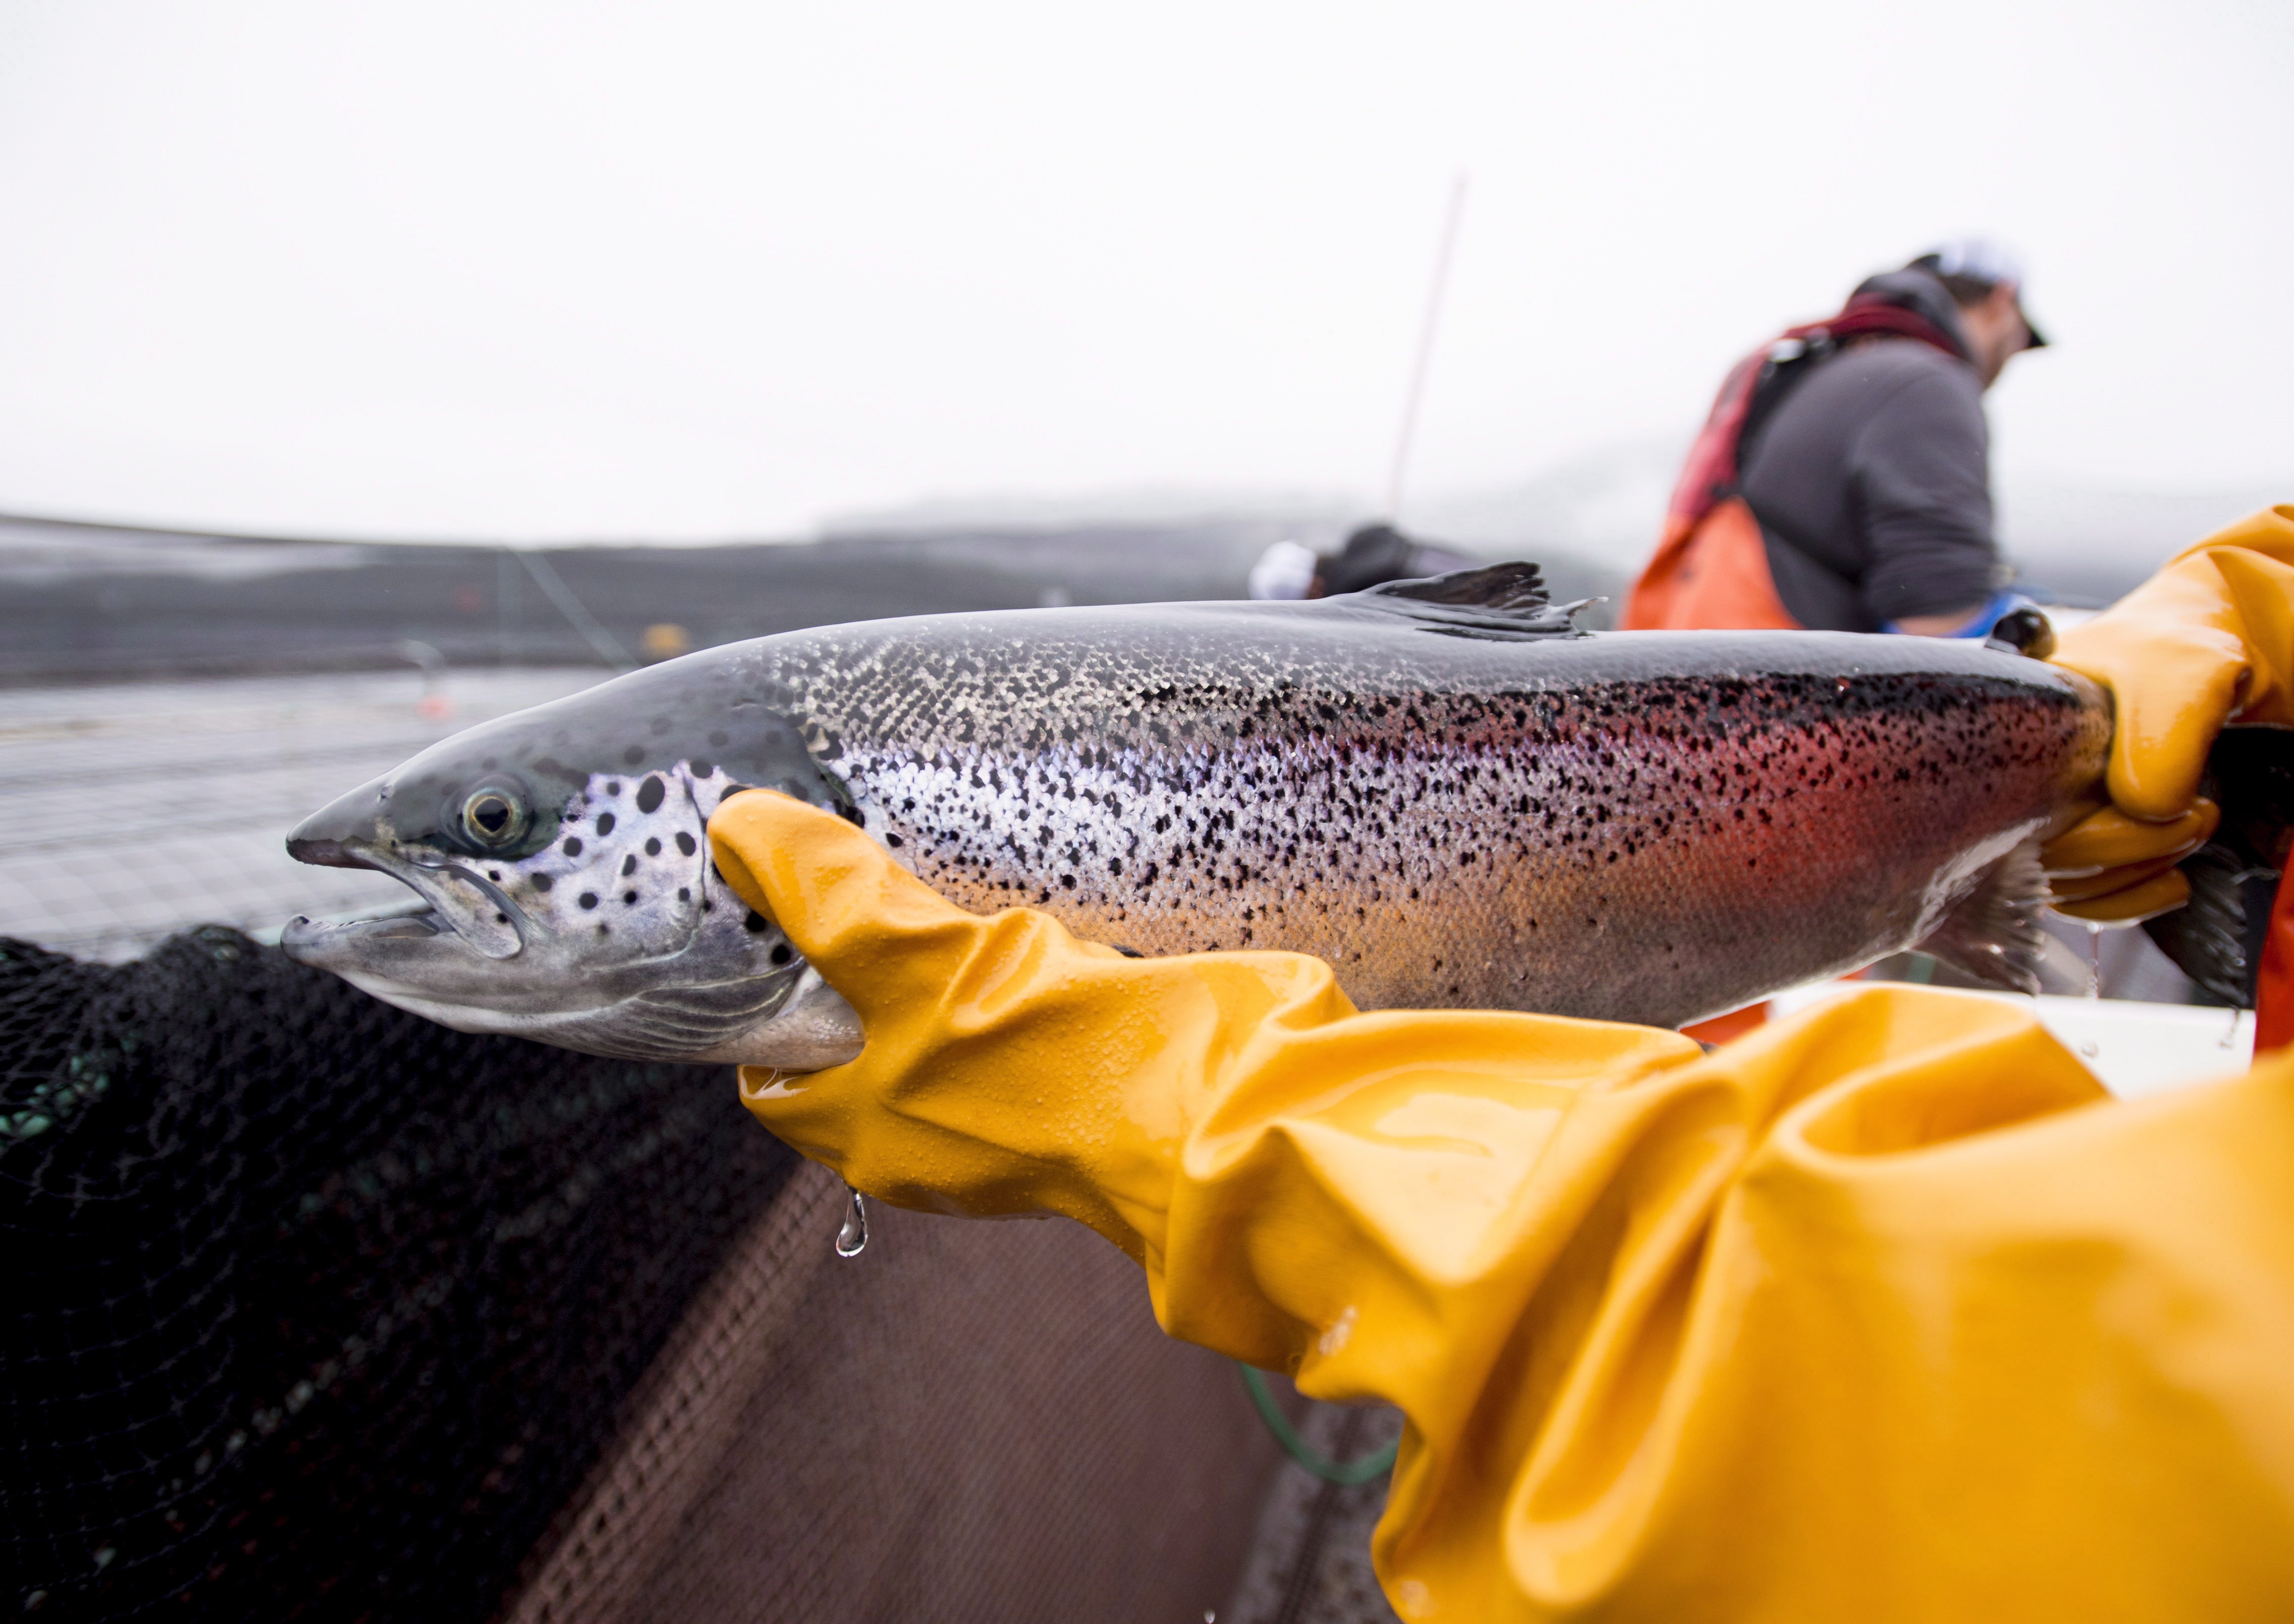 Opinion: The state of Canada's beloved salmon has become awfully